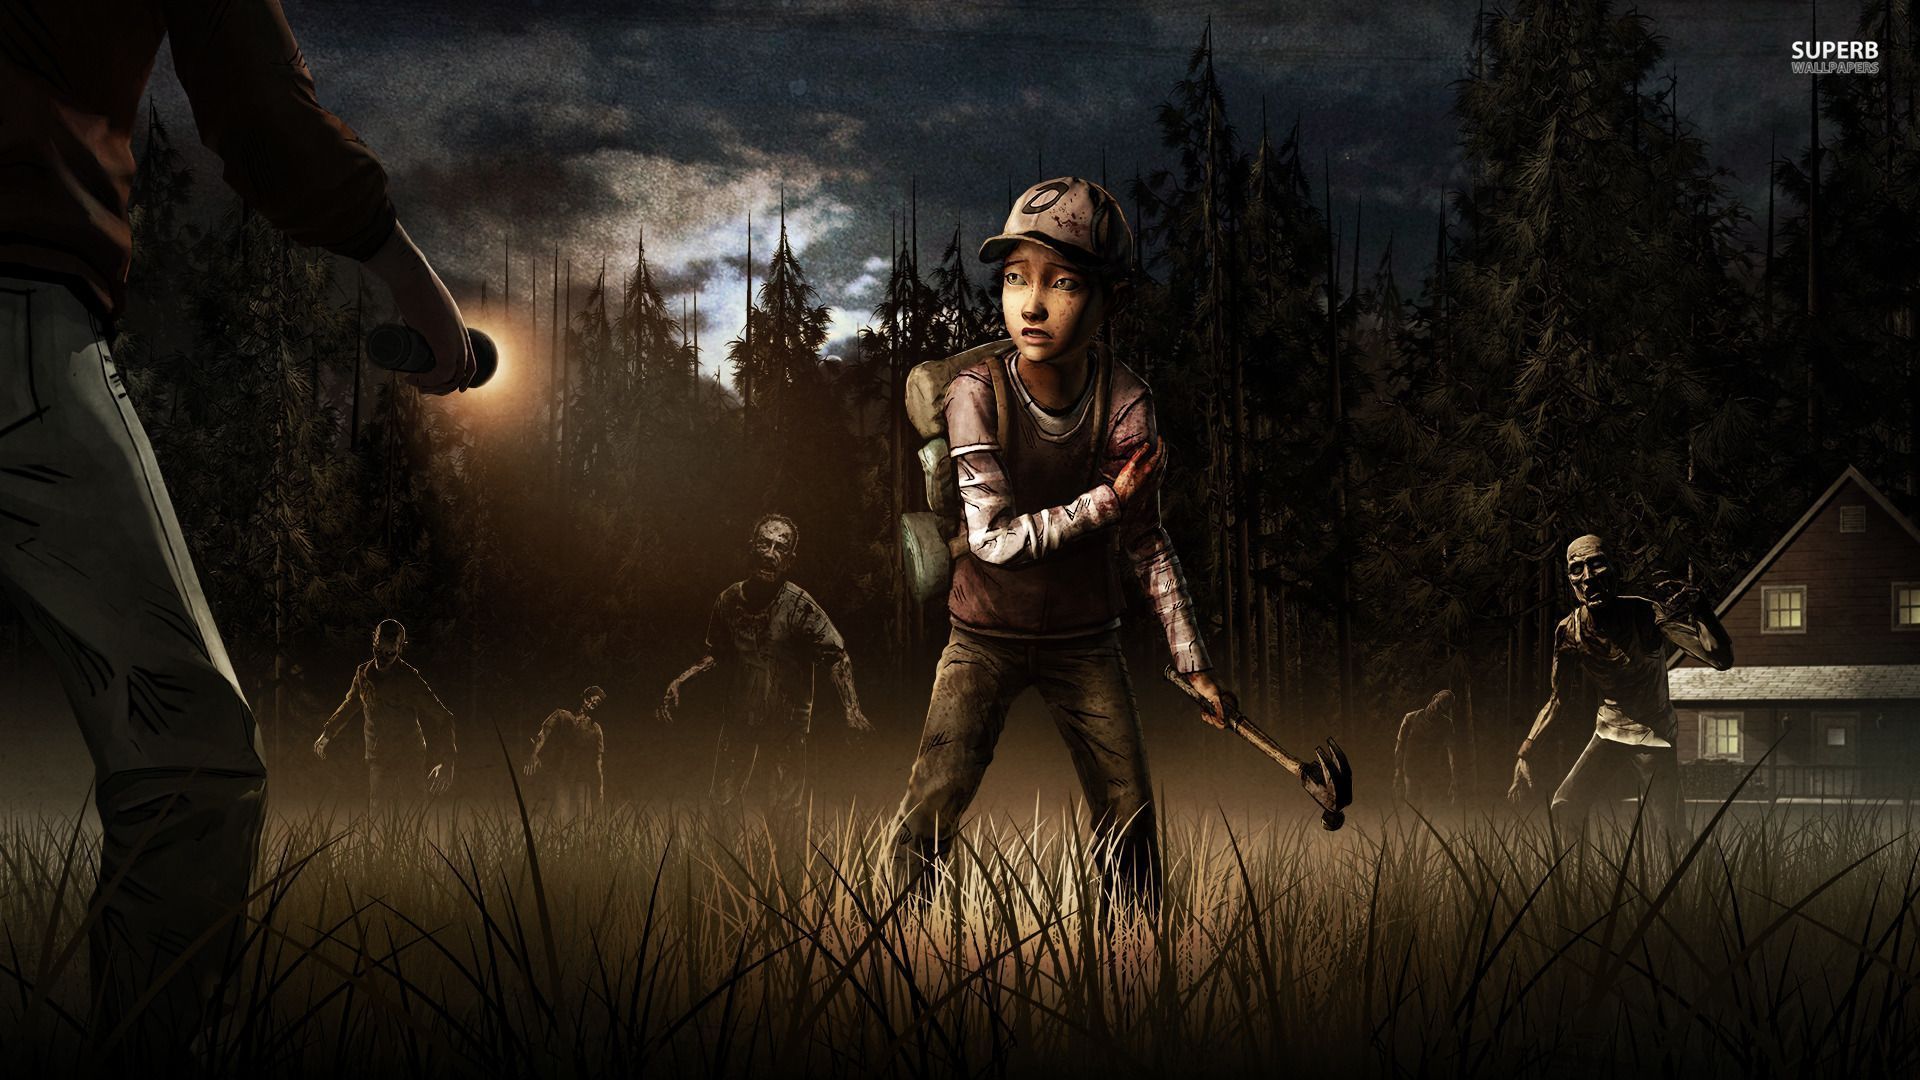 The Walking Dead wallpaper - Game wallpapers - #25645